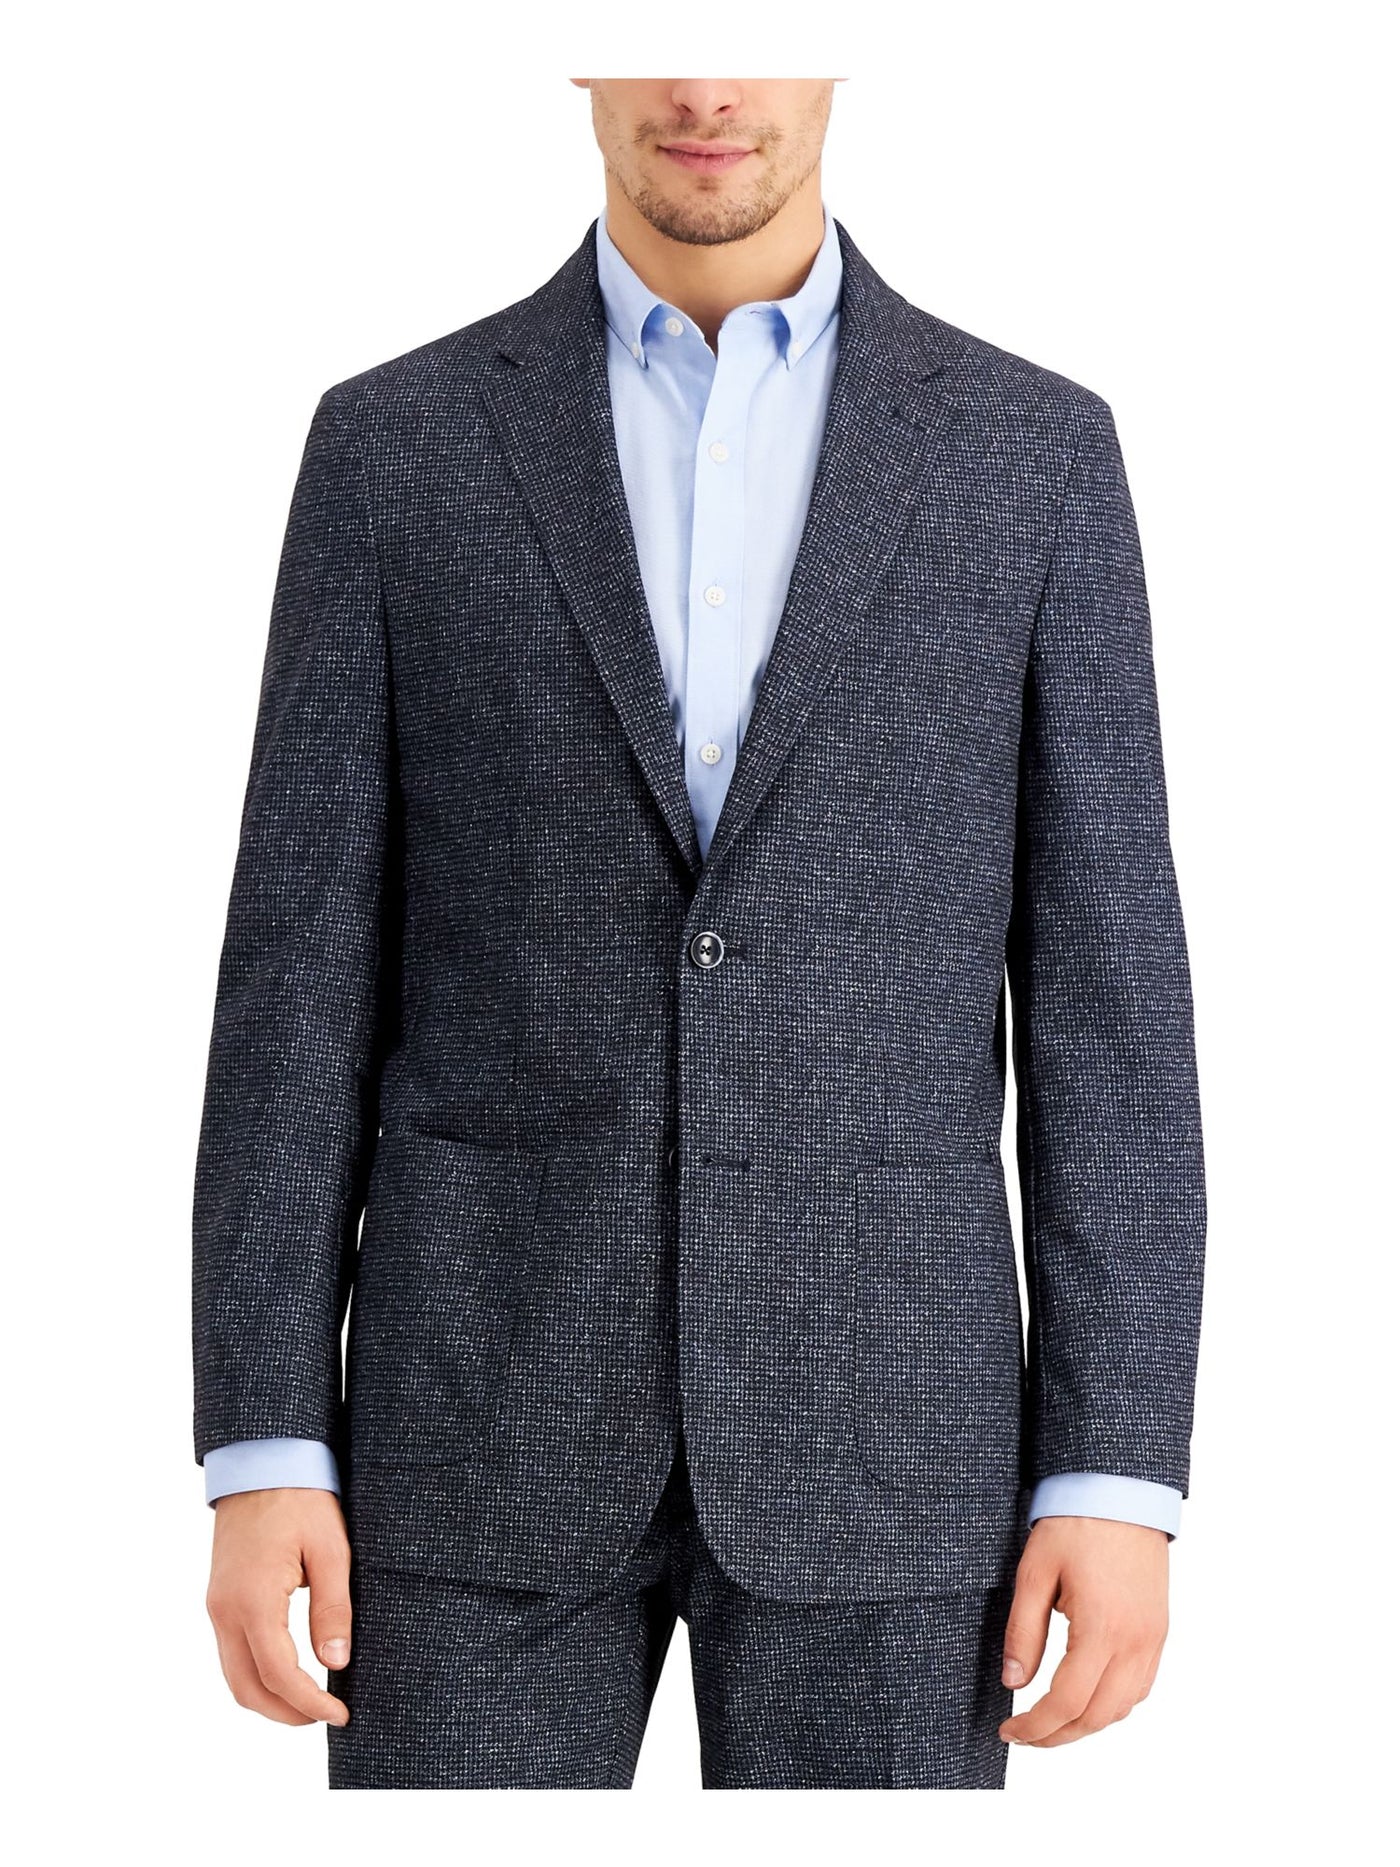 TOMMY HILFIGER Mens Blue Single Breasted, Houndstooth Classic Fit Performance Stretch Suit Separate Blazer Jacket 46L